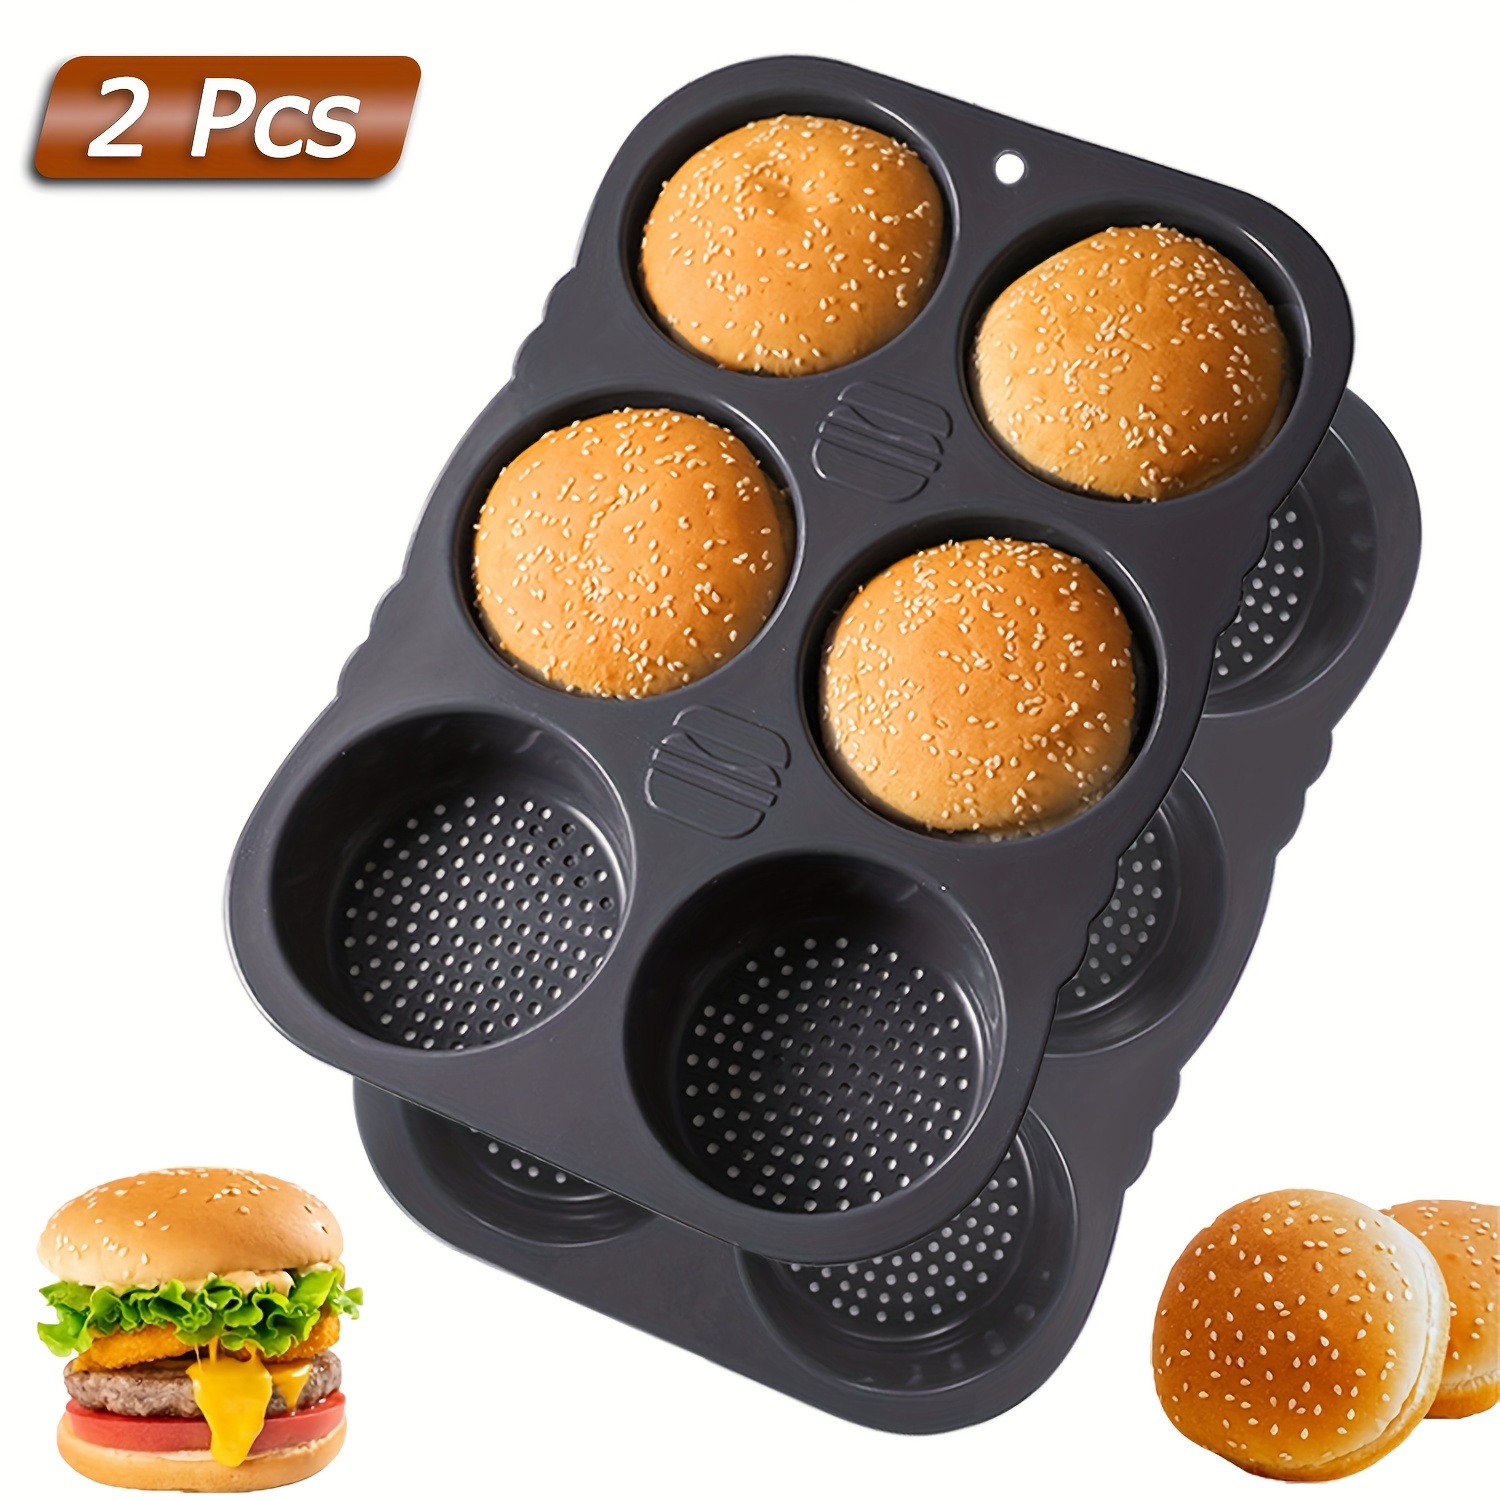 8 Holes Hamburger Bun Pans for Baking Mesh Silicone Bread Pans for Baking Non Stick Perforated Baking Molds, Black